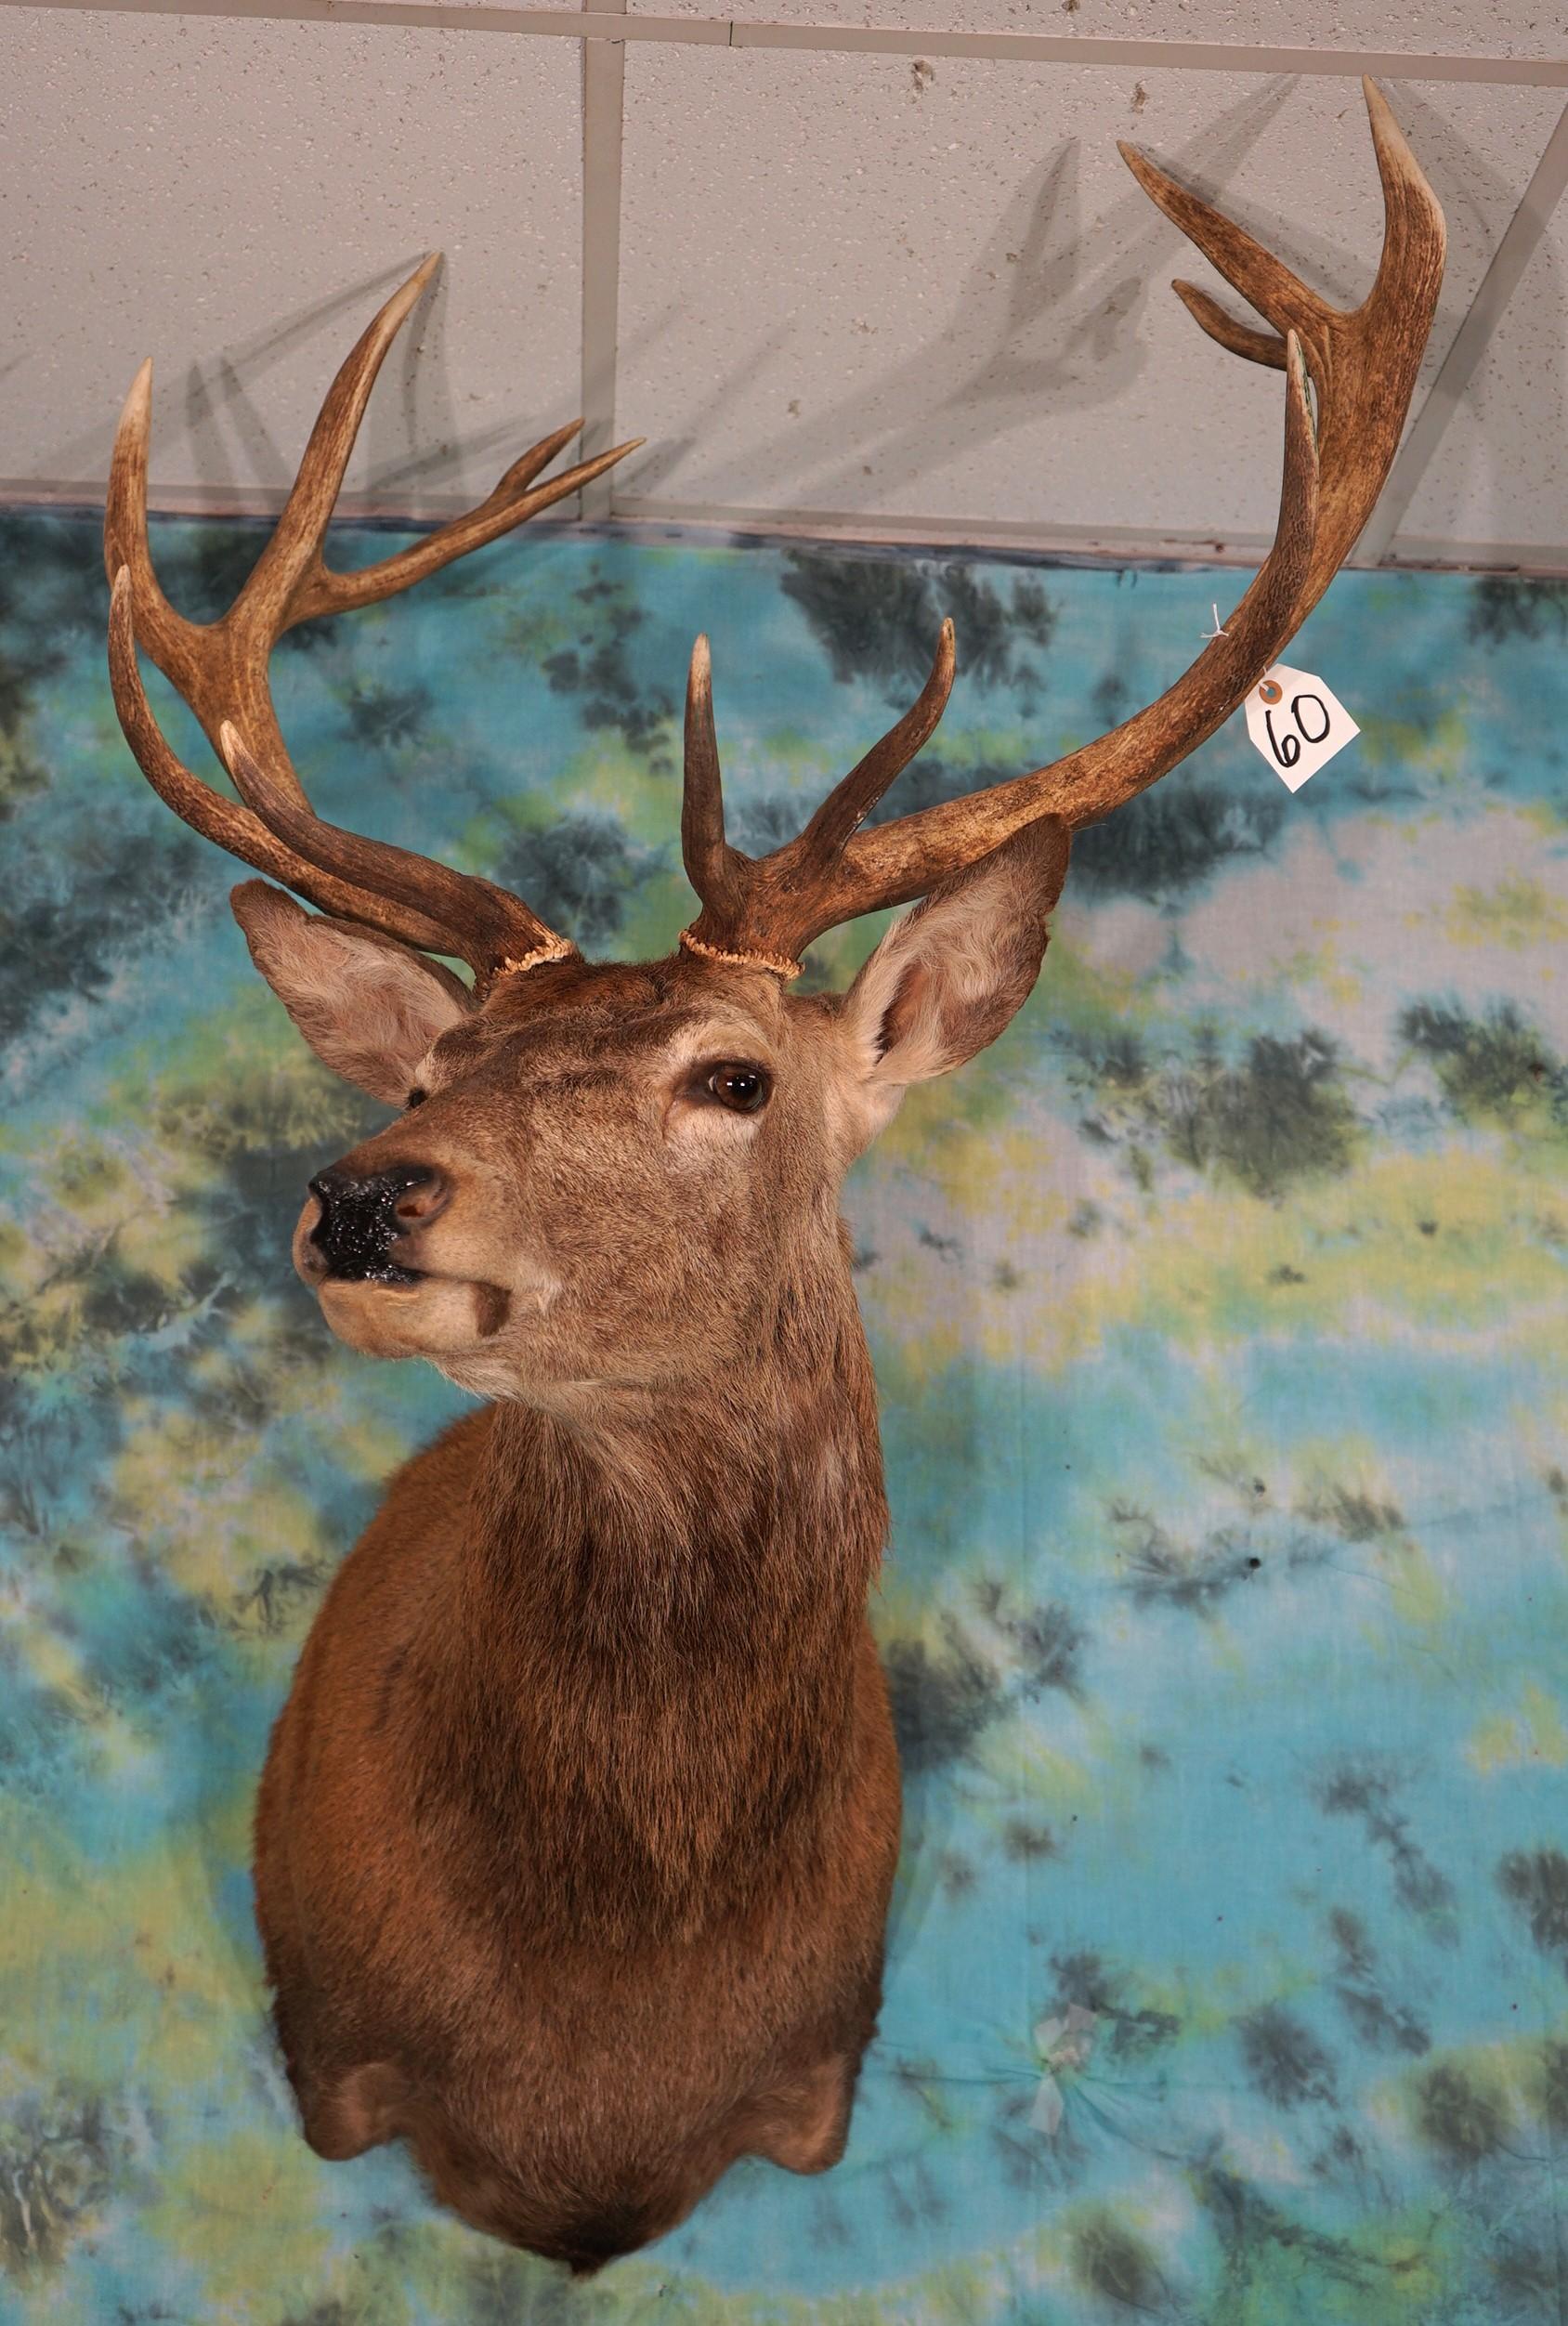 7 x 6 Red Stag Shoulder Mount Taxidermy